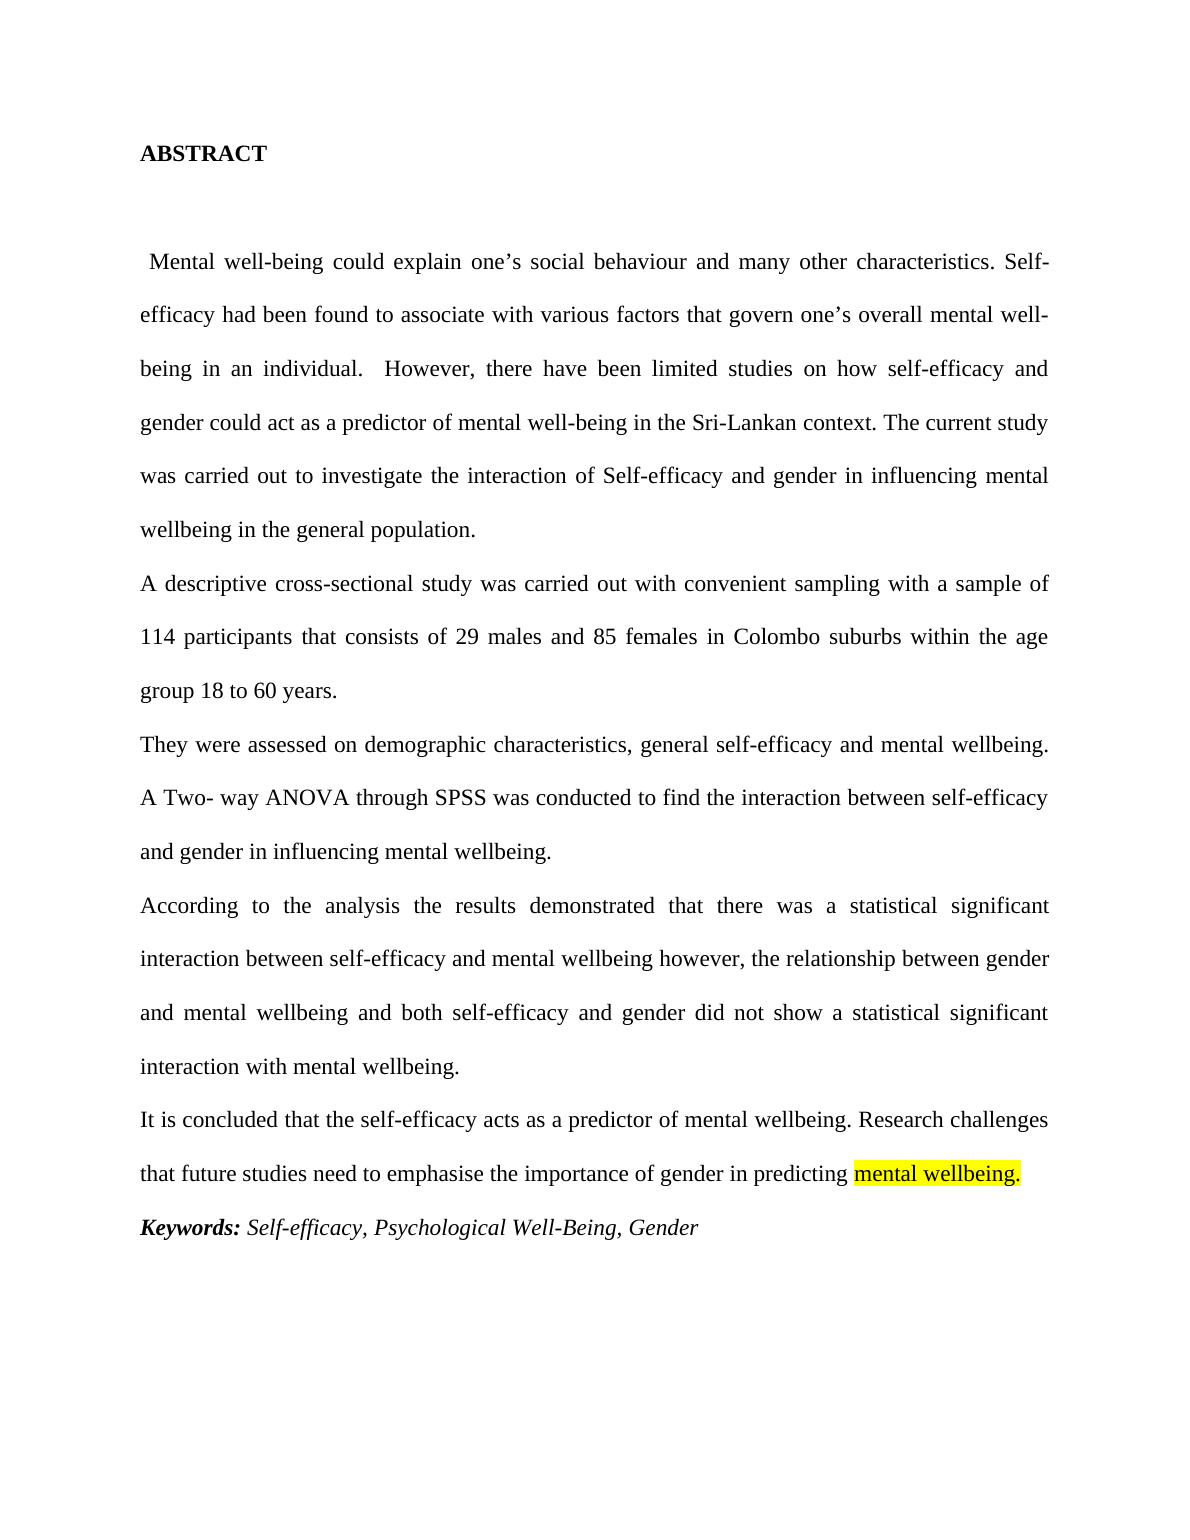 Report on Self-Efficacy and Gender in Influencing Mental Well-Being_2